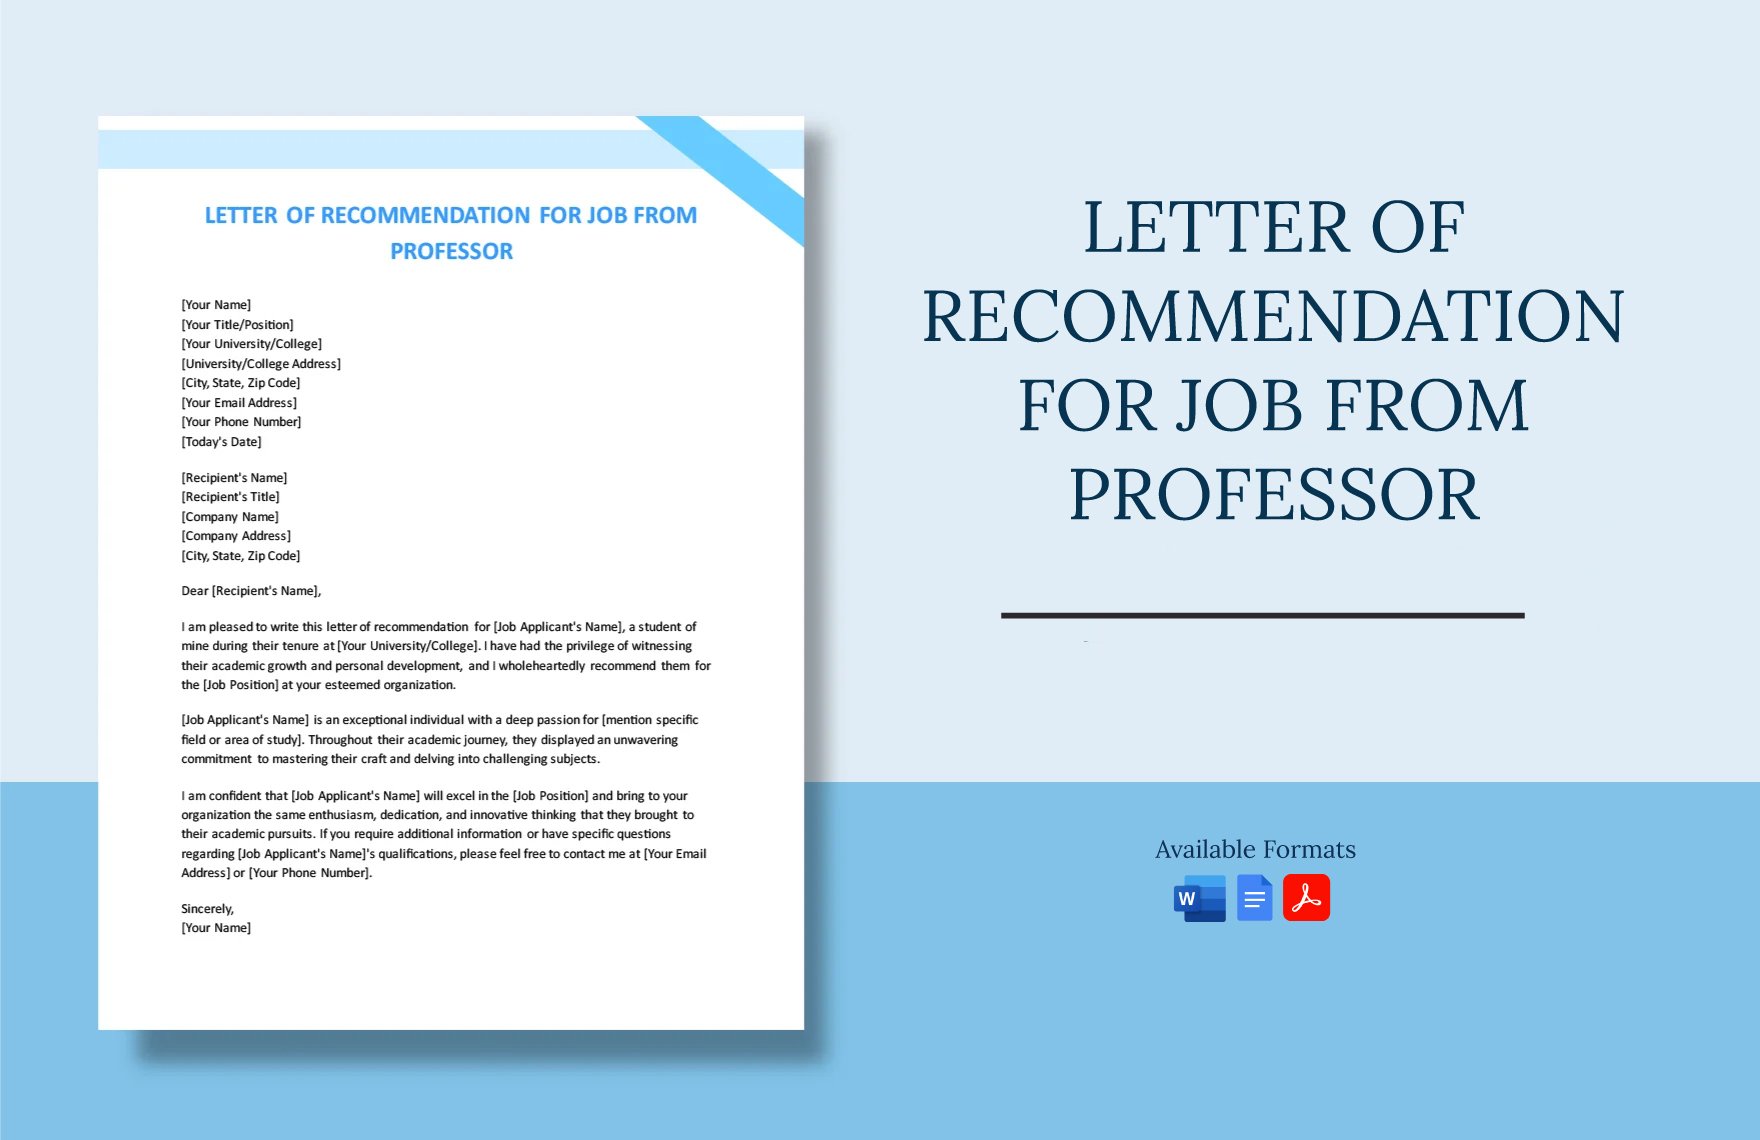 Letter Of Recommendation For Job From Professor